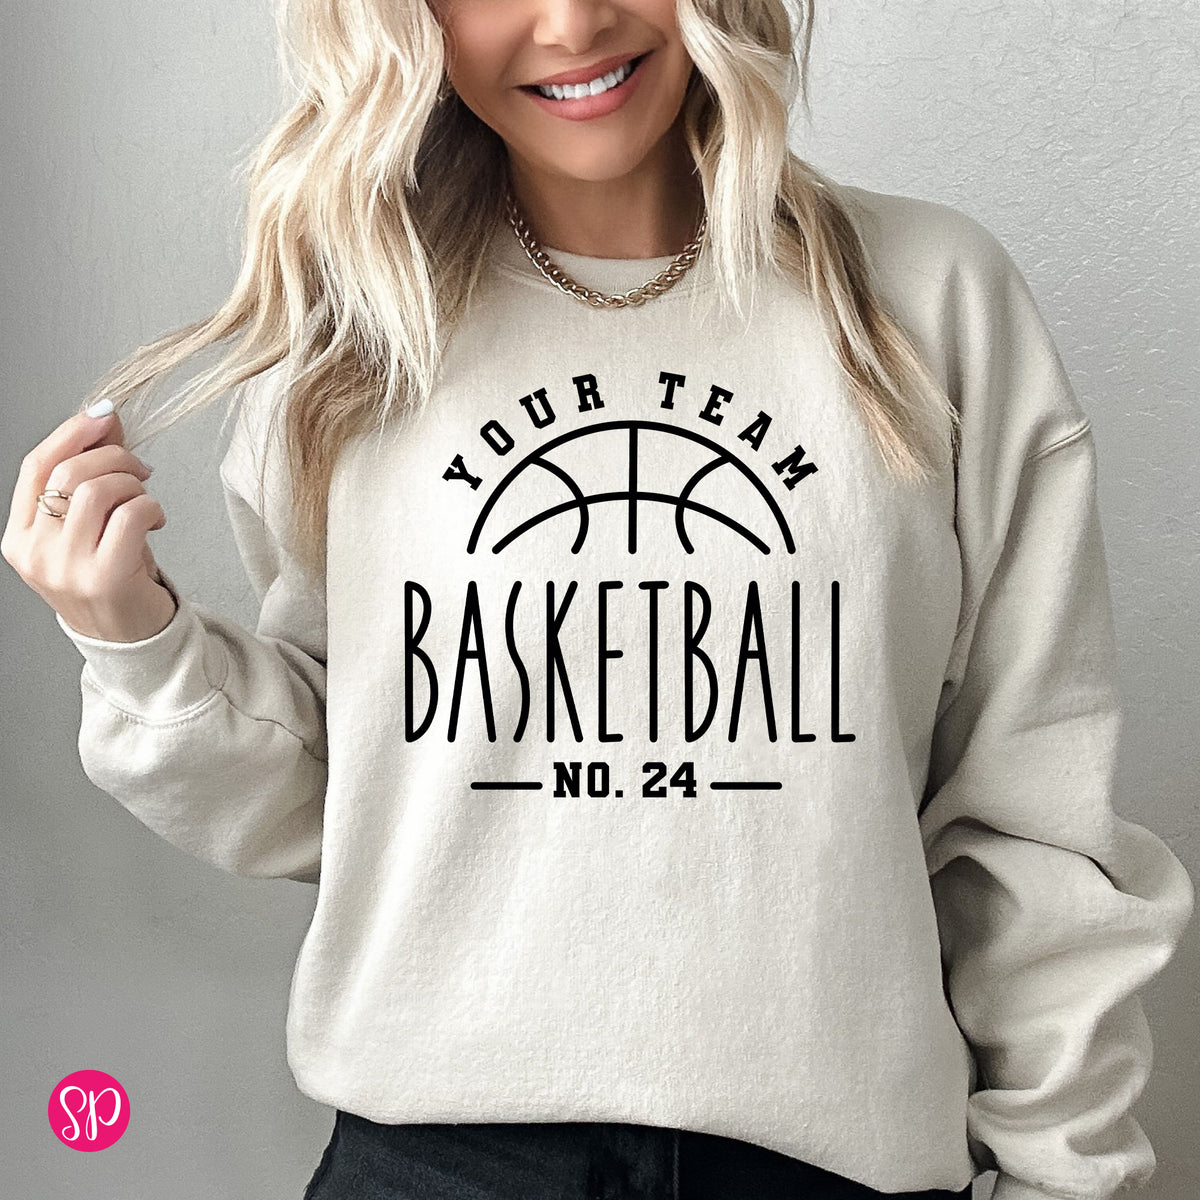 Your Team Basketball with Custom Number (Skinny Text) Sweatshirt